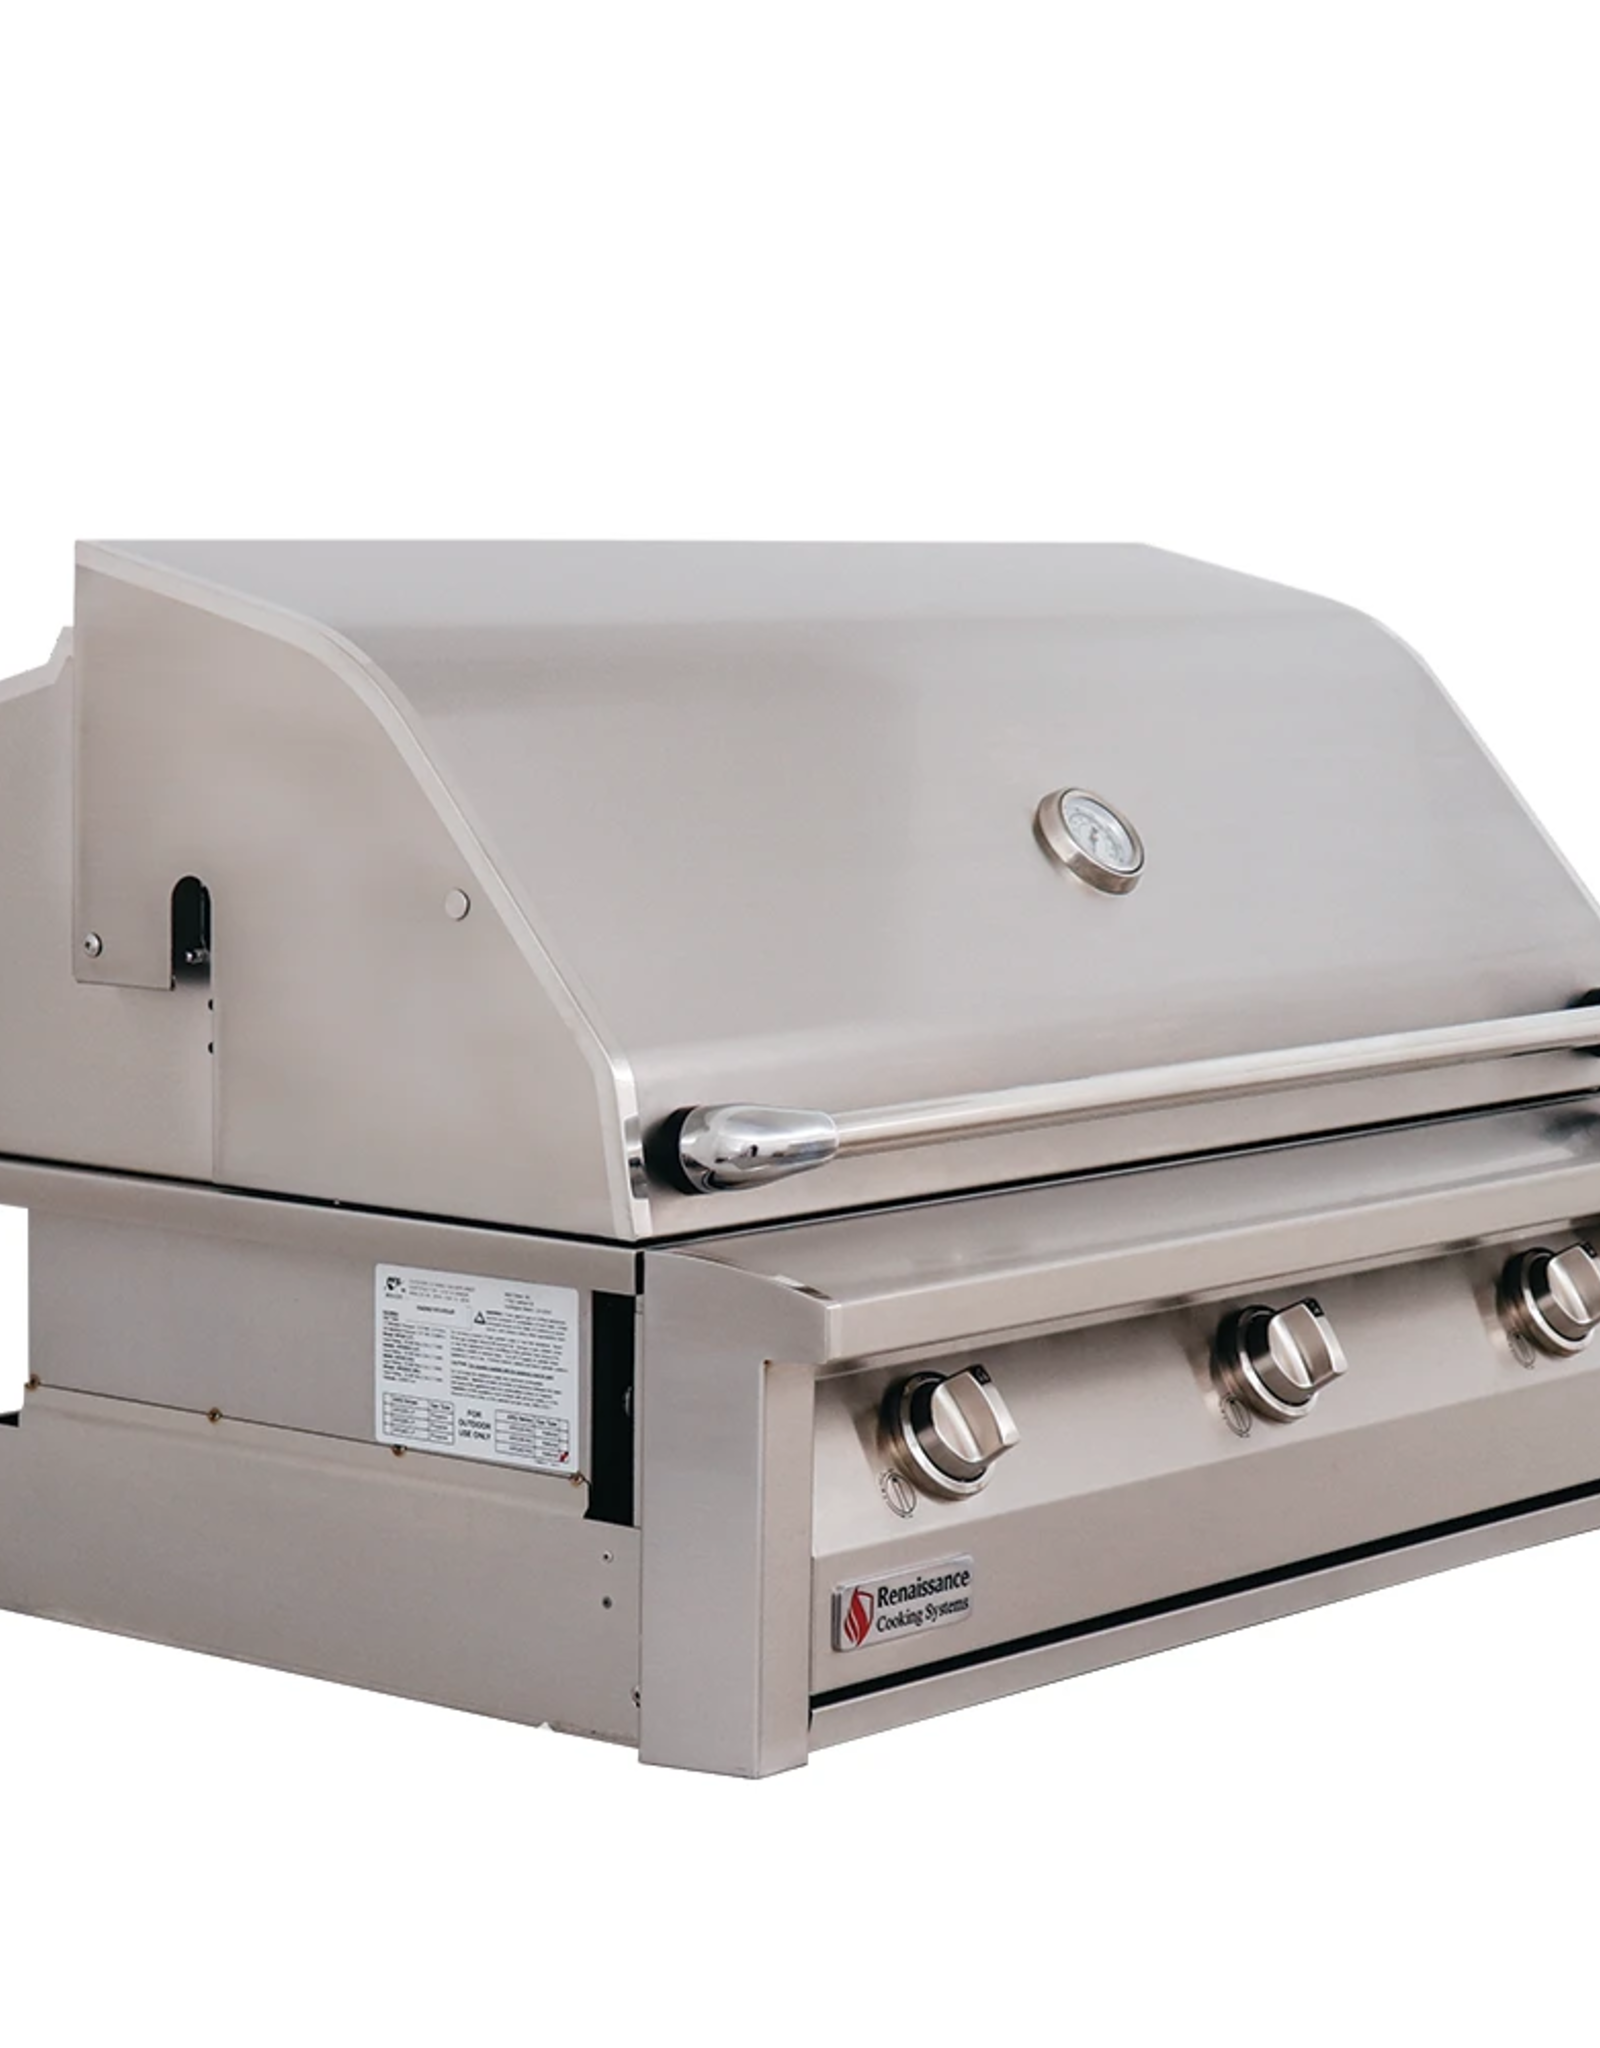 Renaissance Cooking Systems Renaissance Cooking Systems ARG 42" Drop-In Gas Grill - ARG42